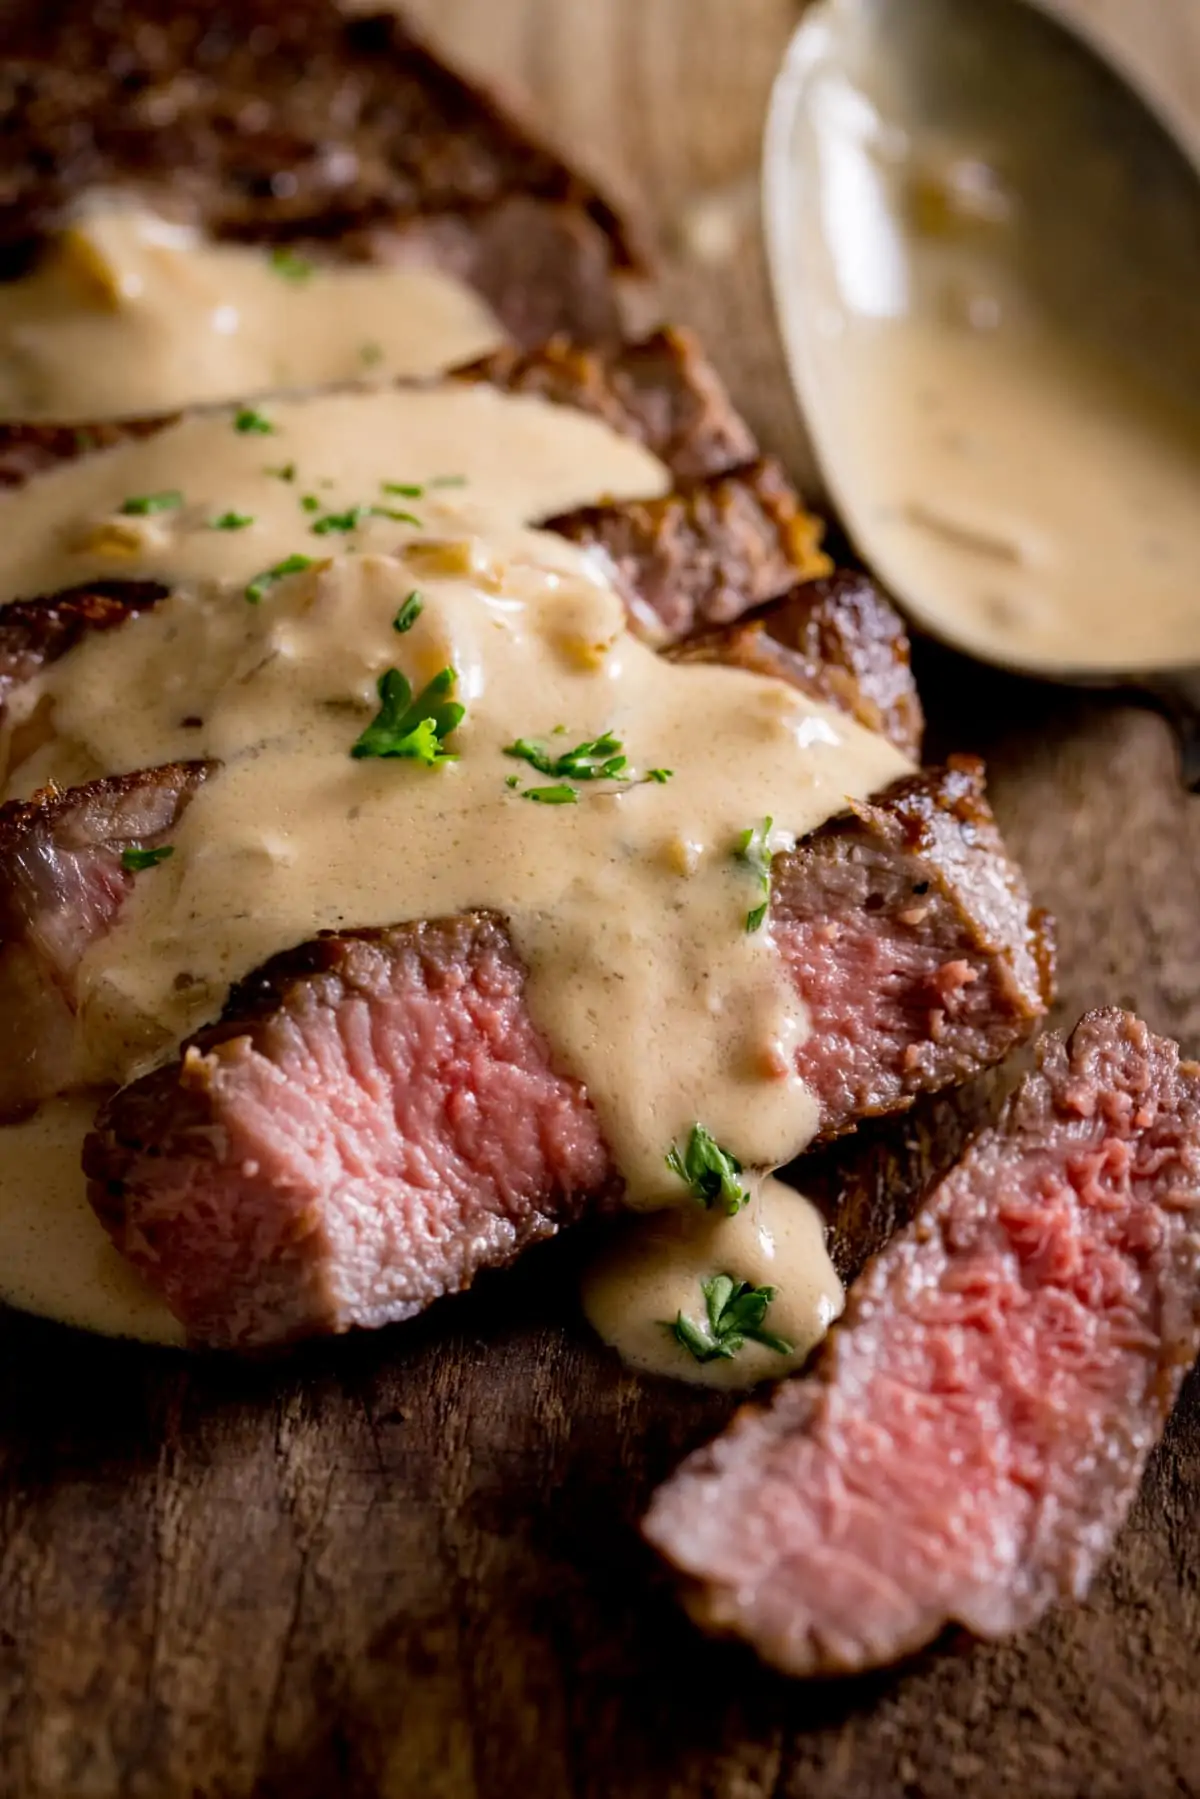 A tall image of a cooked sliced steak with diane sauce over the top with parsley sprinkled on top, a spoon is next to the steak, on a wooden board